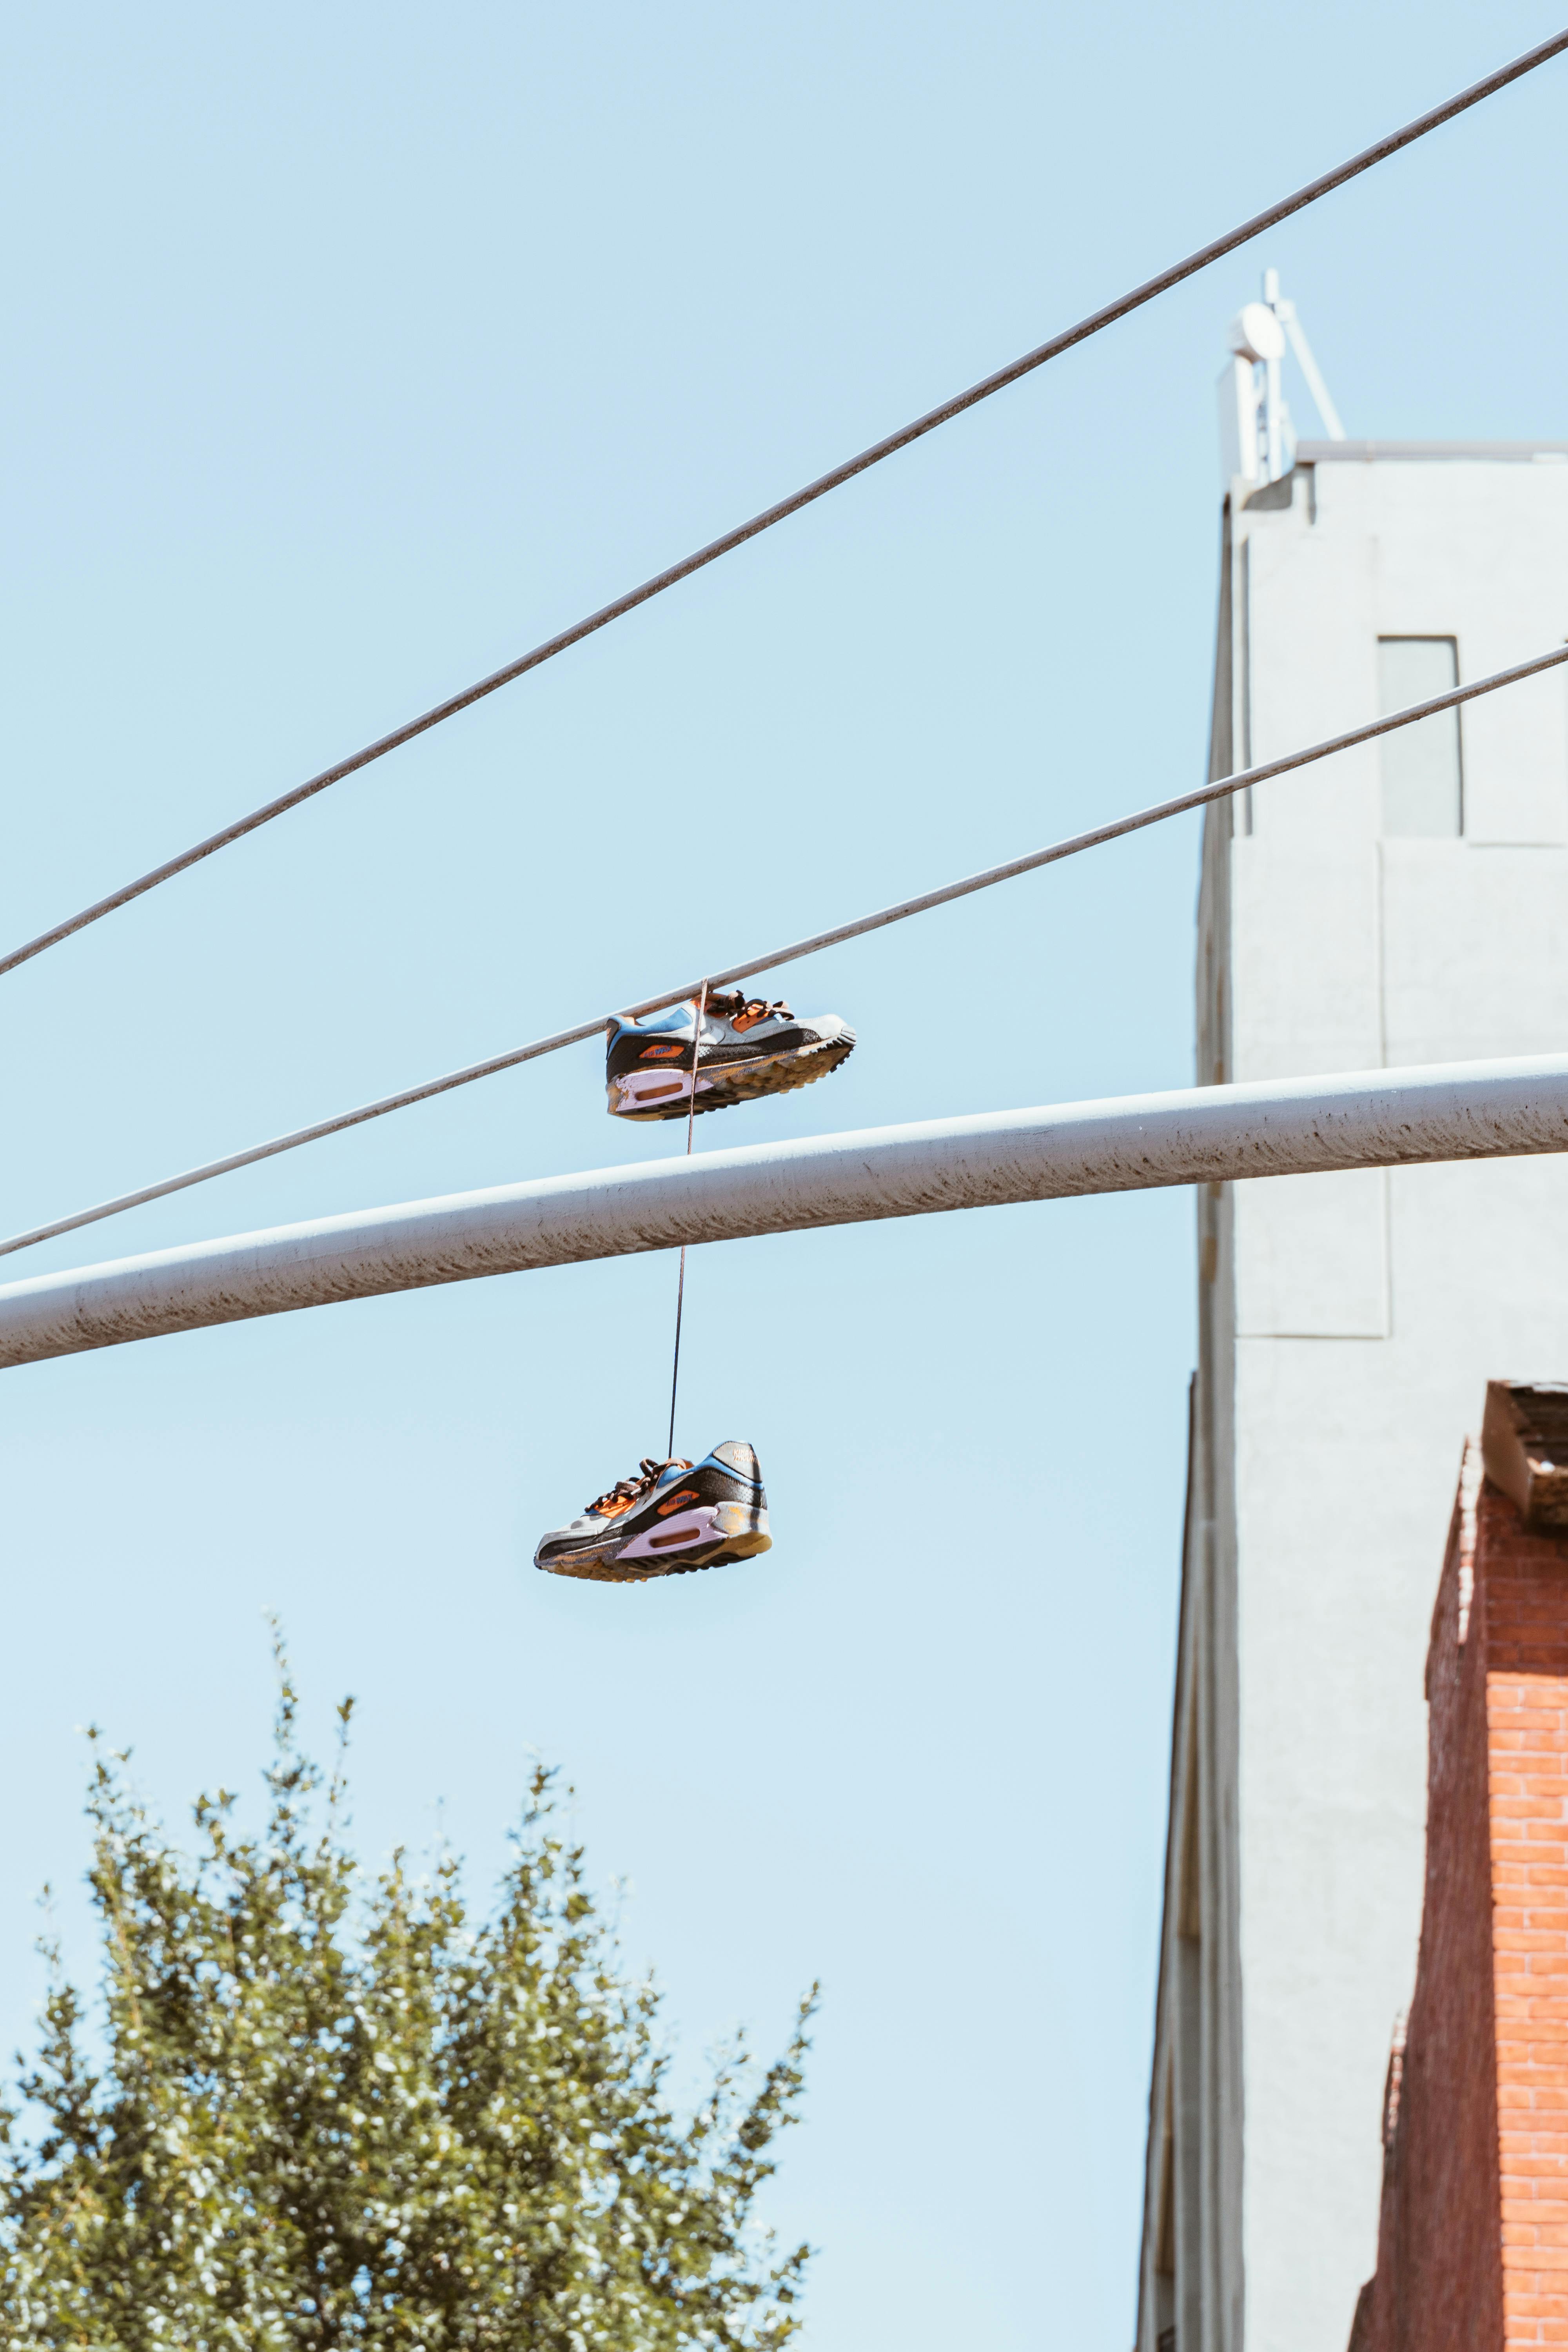 Old Kicks (white sneakers hanging from power lines)